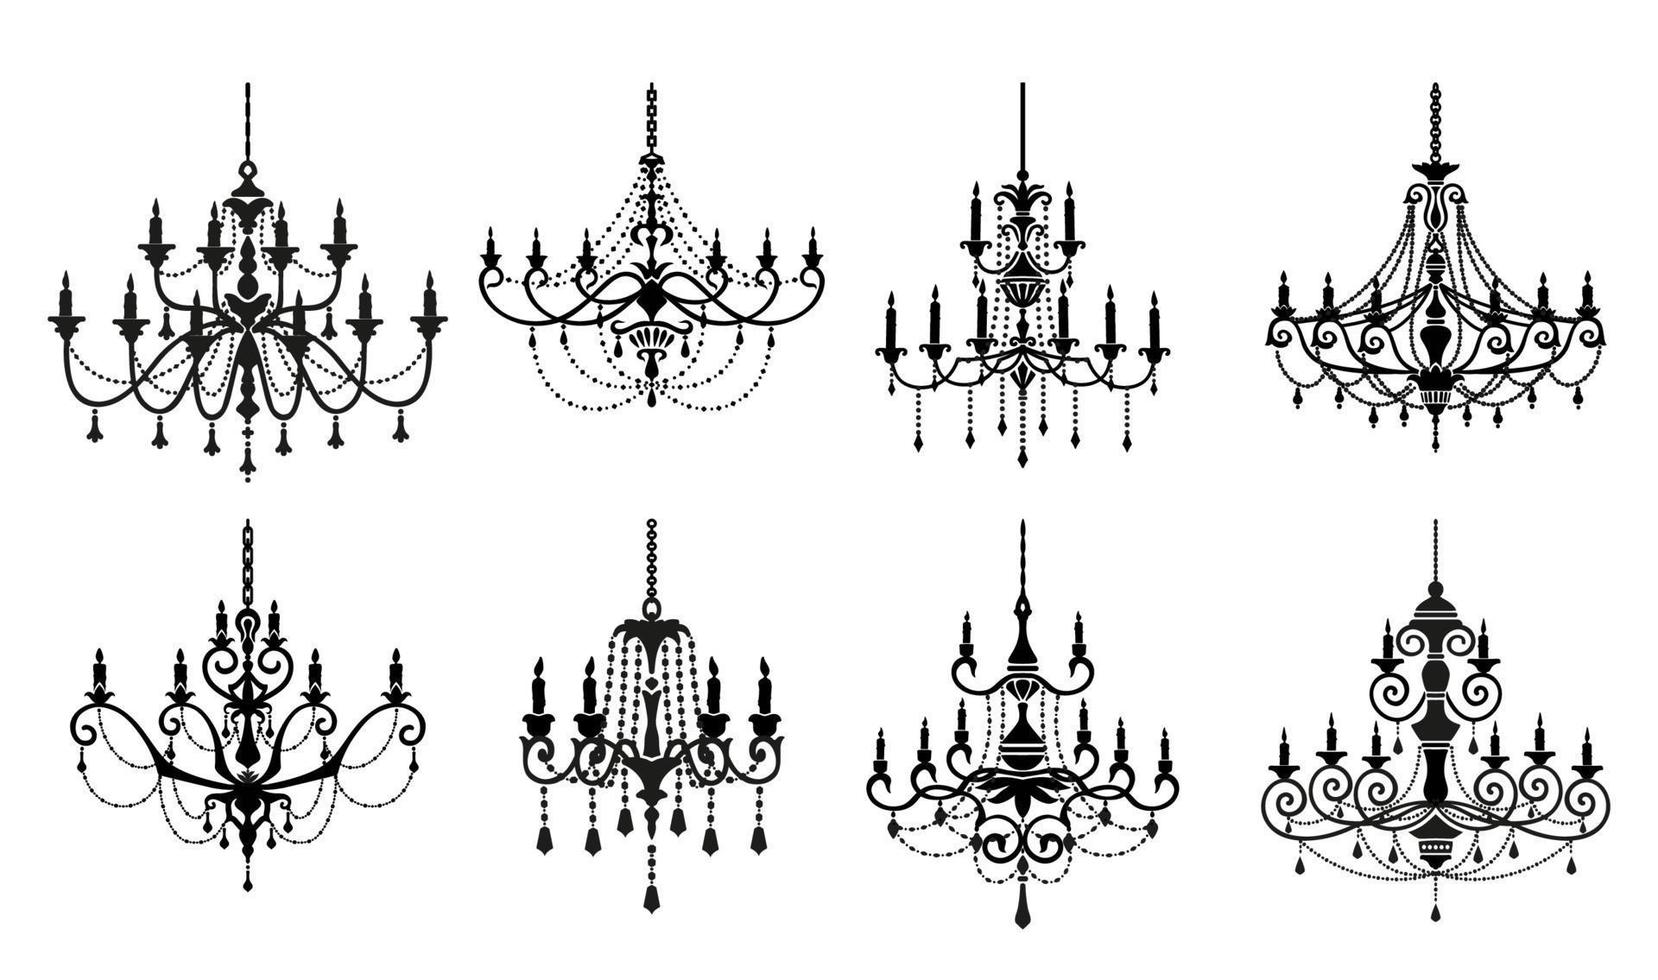 Chandelier silhouettes, vintage luster lamp vector